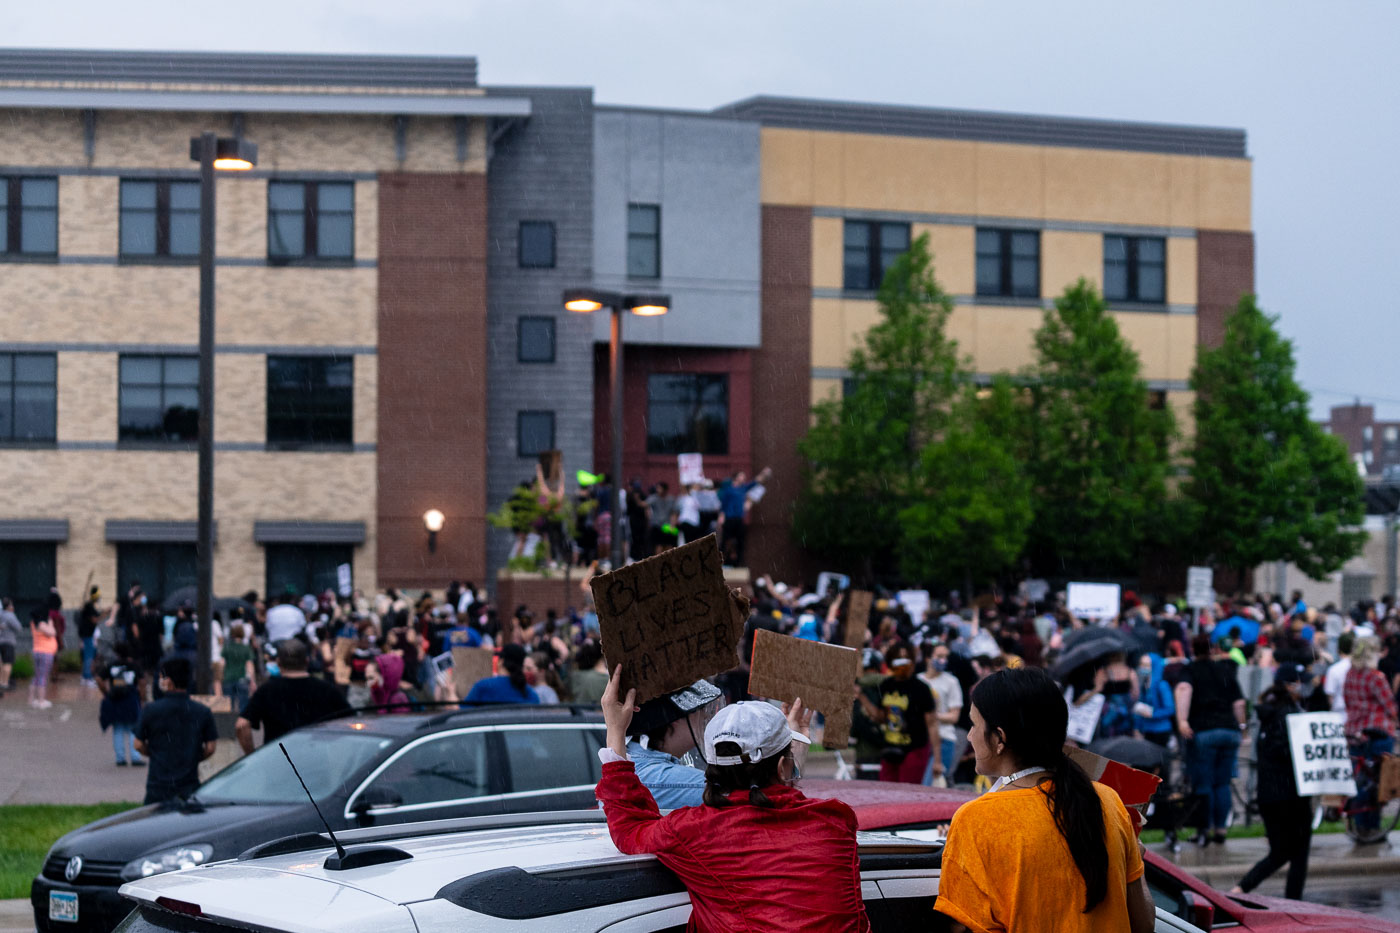 Protesters arrive at the Minneapolis Police 3rd precinct